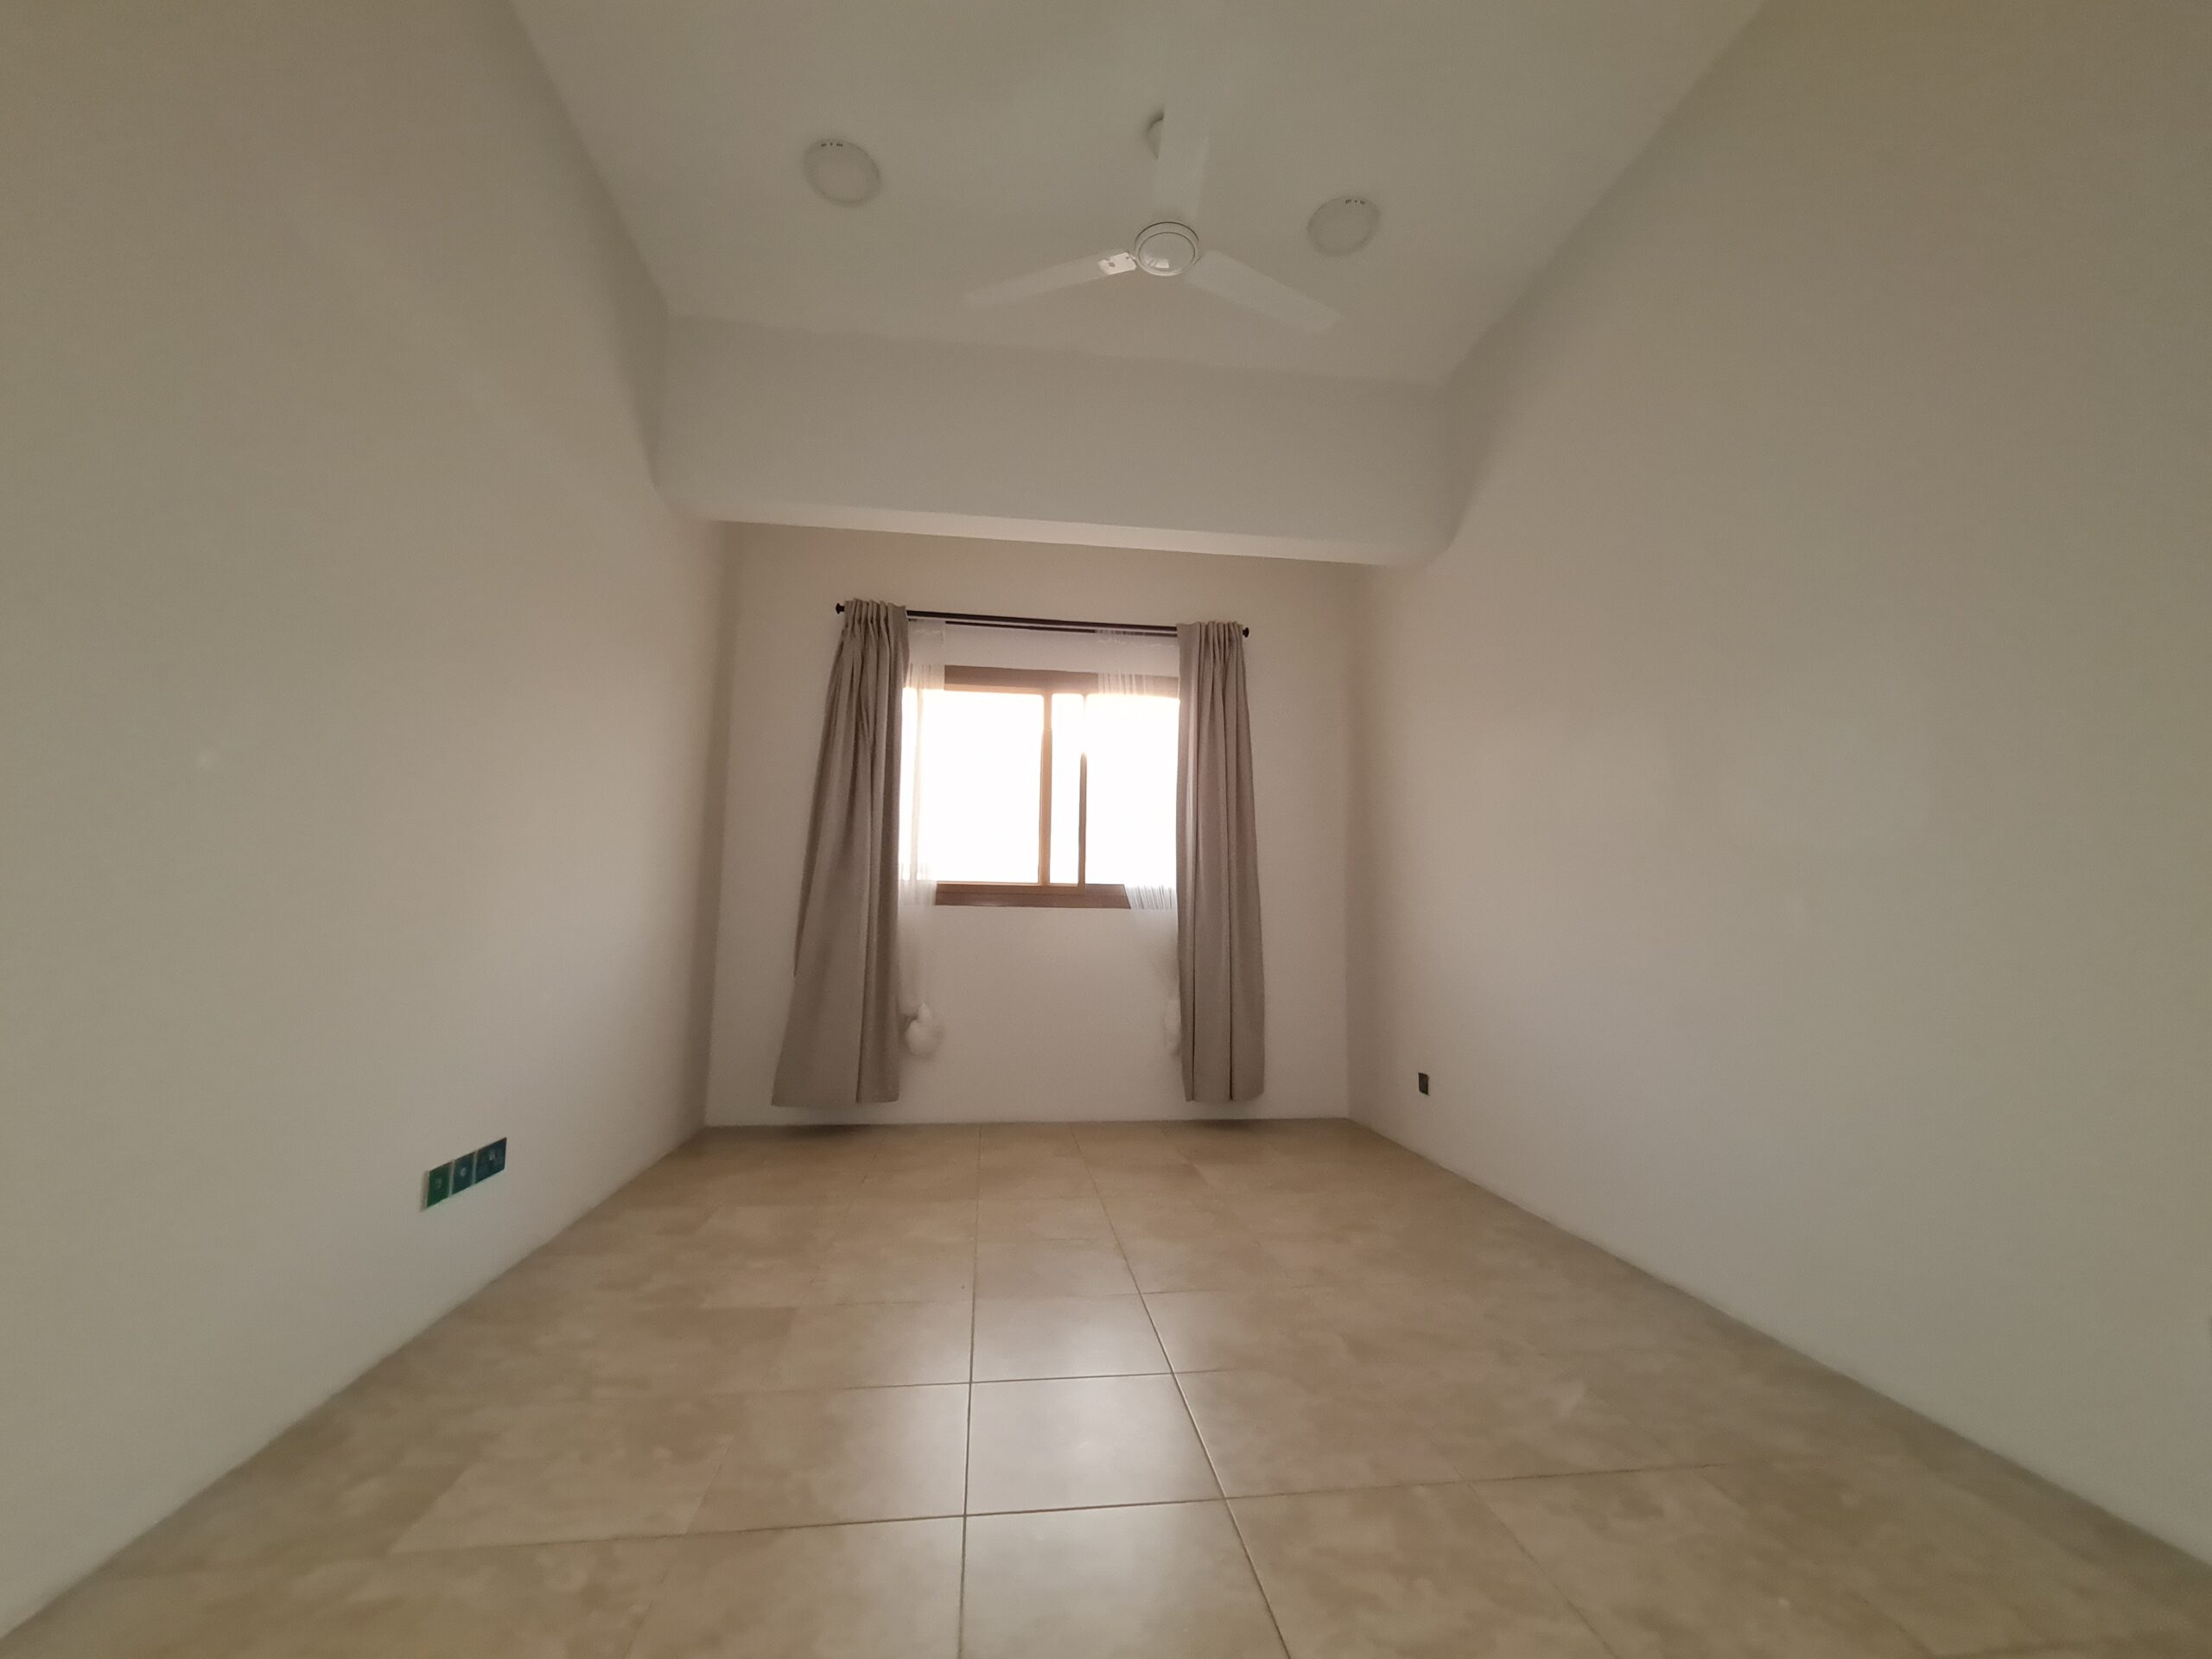 Luxury apartment for rent semi-furnished located in Zinj